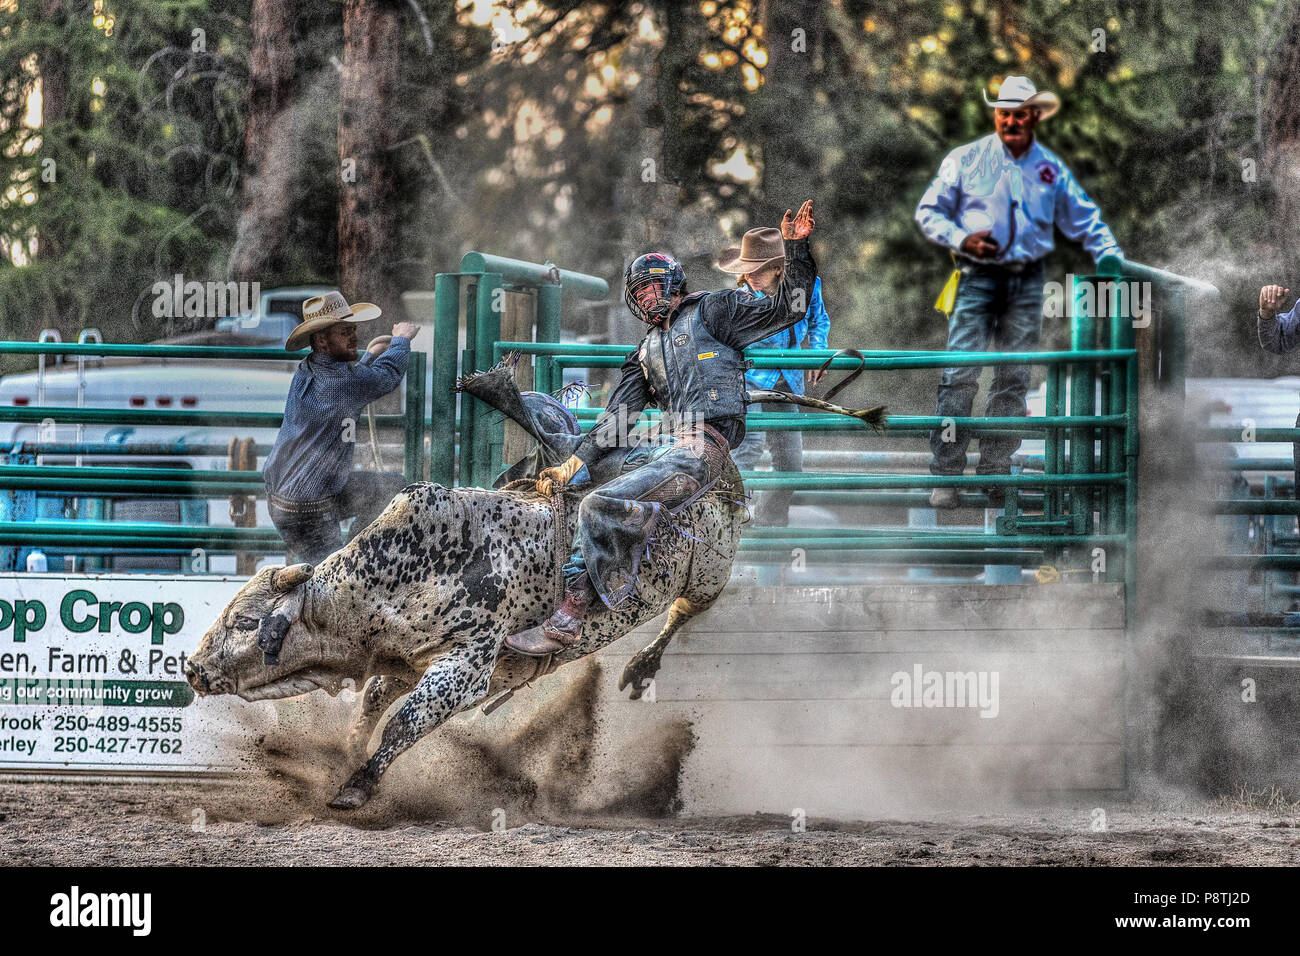 Bull Riding, rodeo's most exciting and dangerous sport. Huge bulls trying to throw the cowboys from there back. Cranbrook, BC, Canada. Kyle Brown ridi Stock Photo